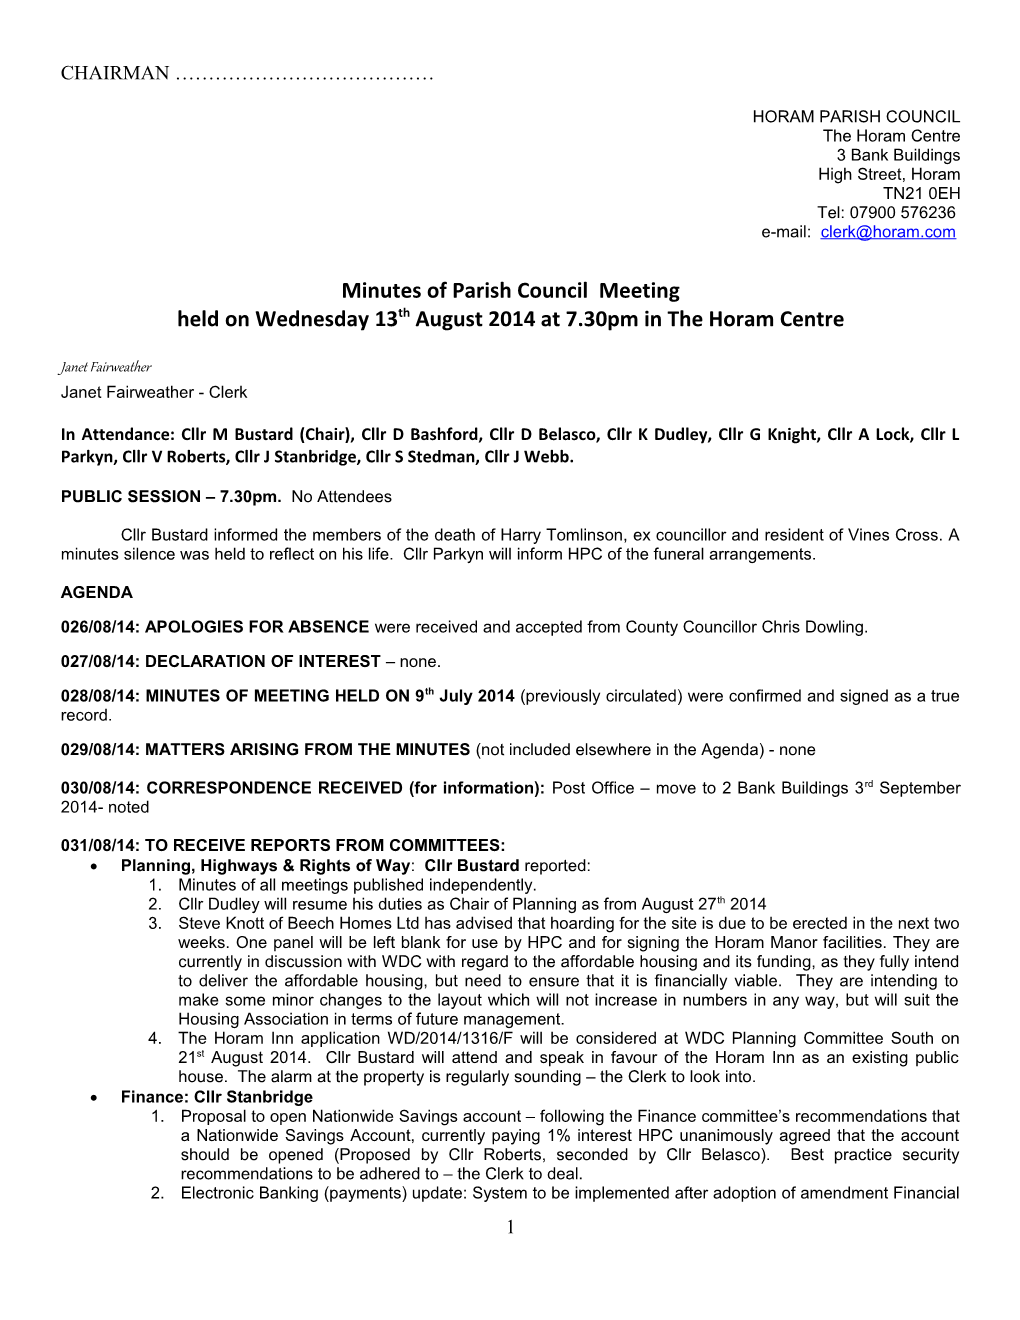 Horam Parish Council Planning Committee Meeting